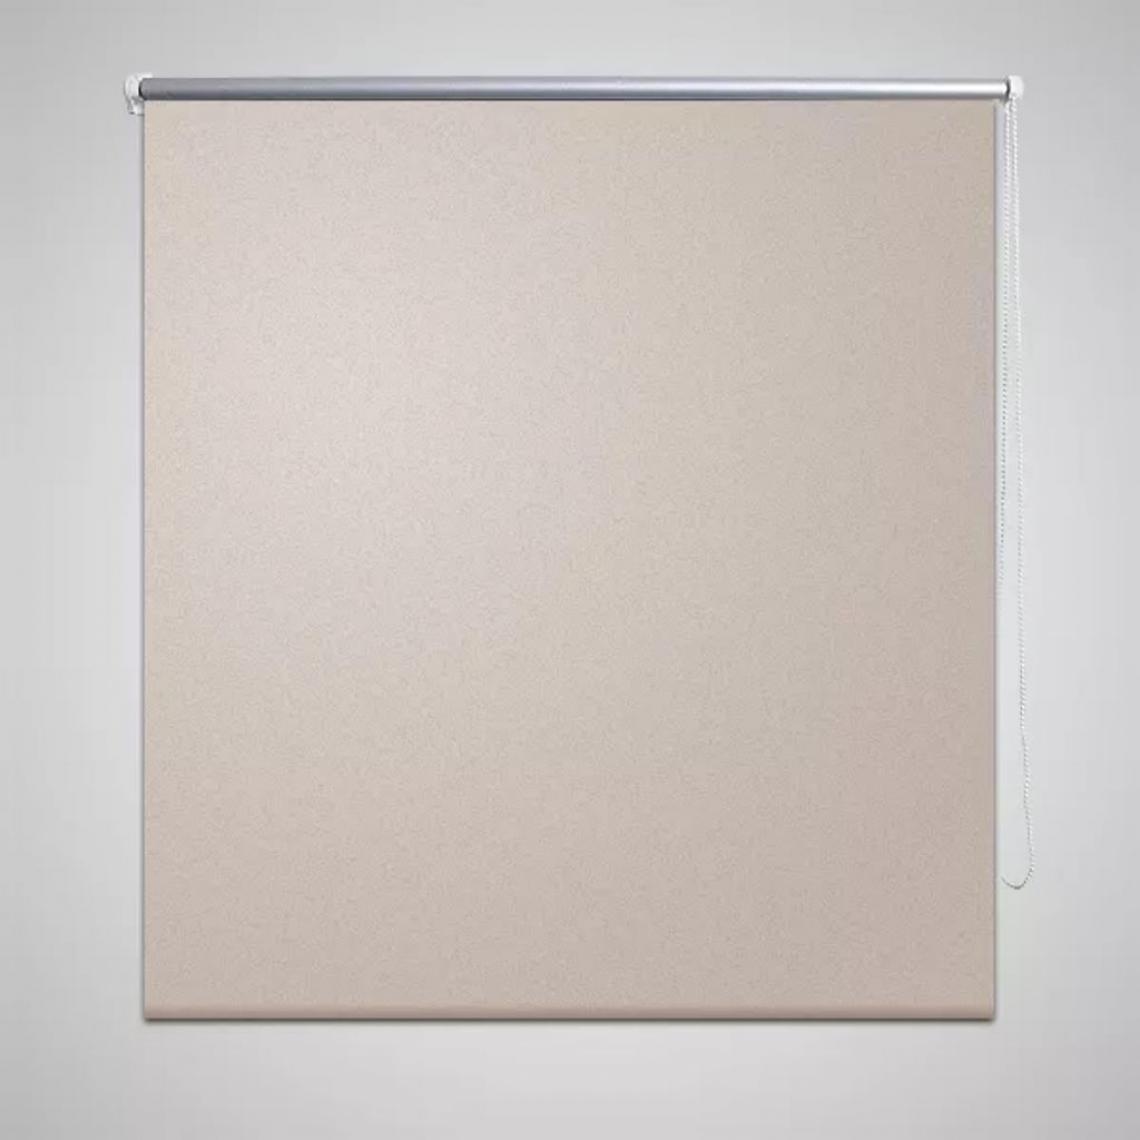 Chunhelife - Store enrouleur occultant 140 x 175 cm beige - Store banne